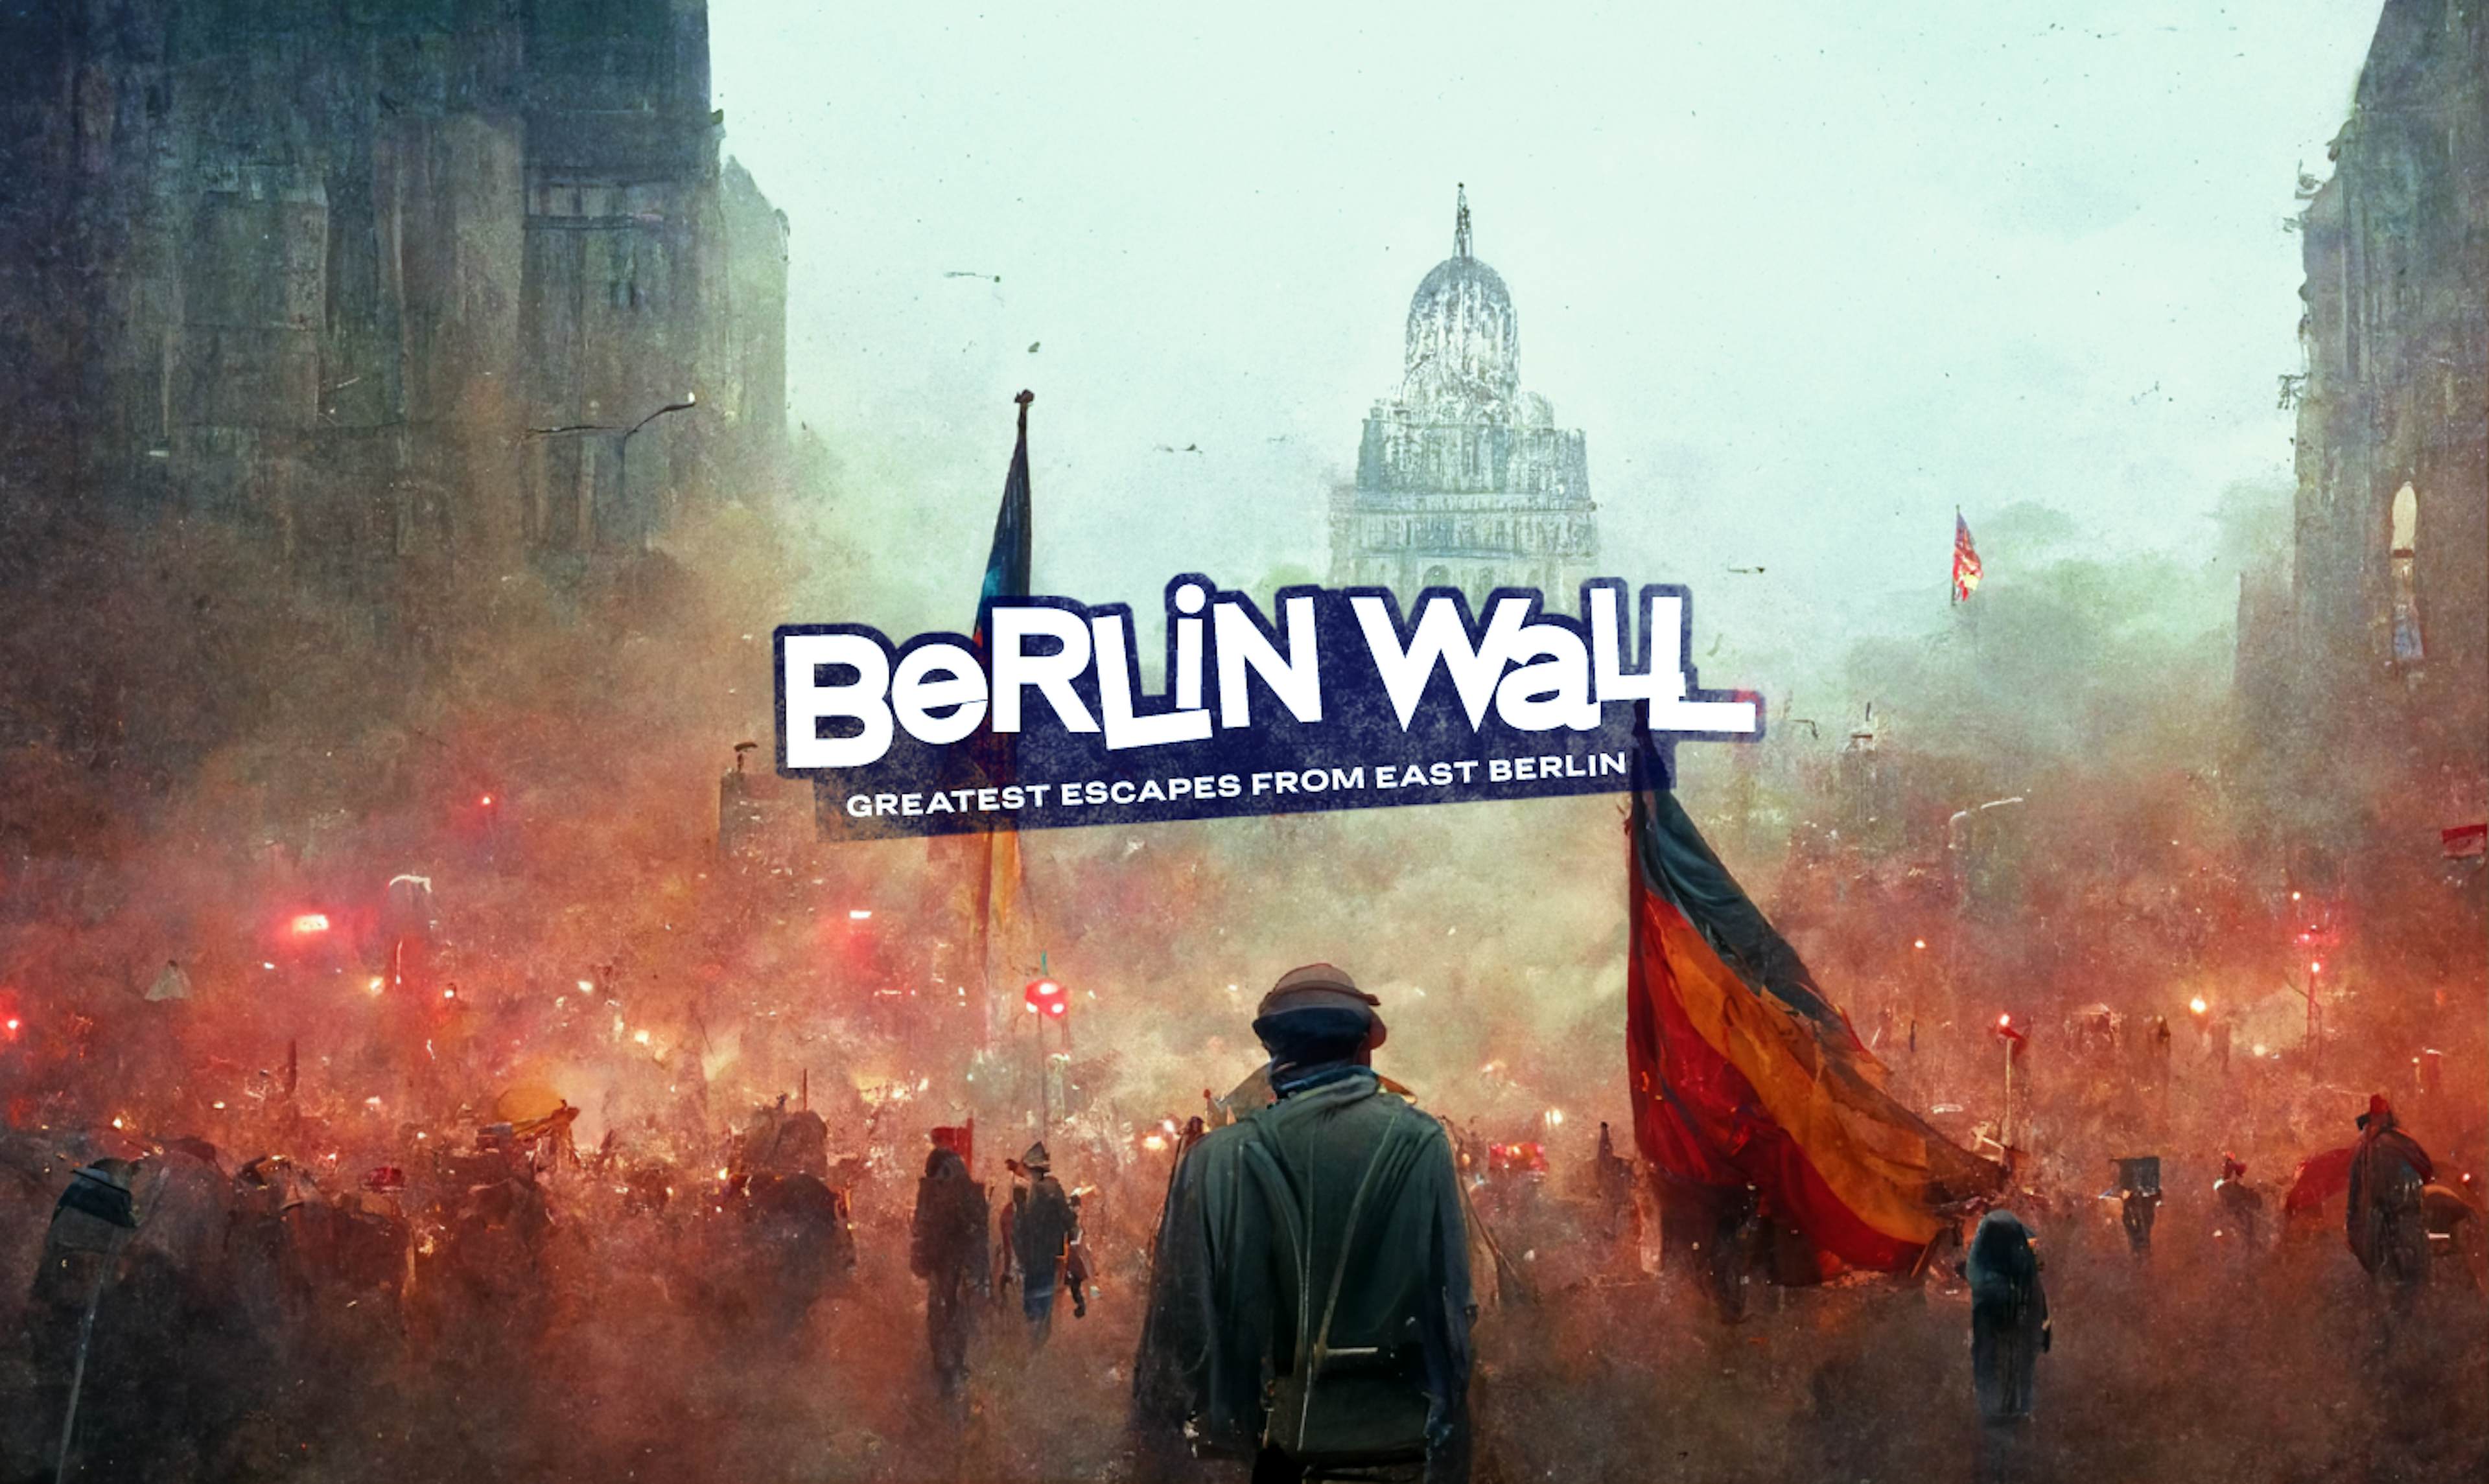 Greatest Escapes from East Berlin image